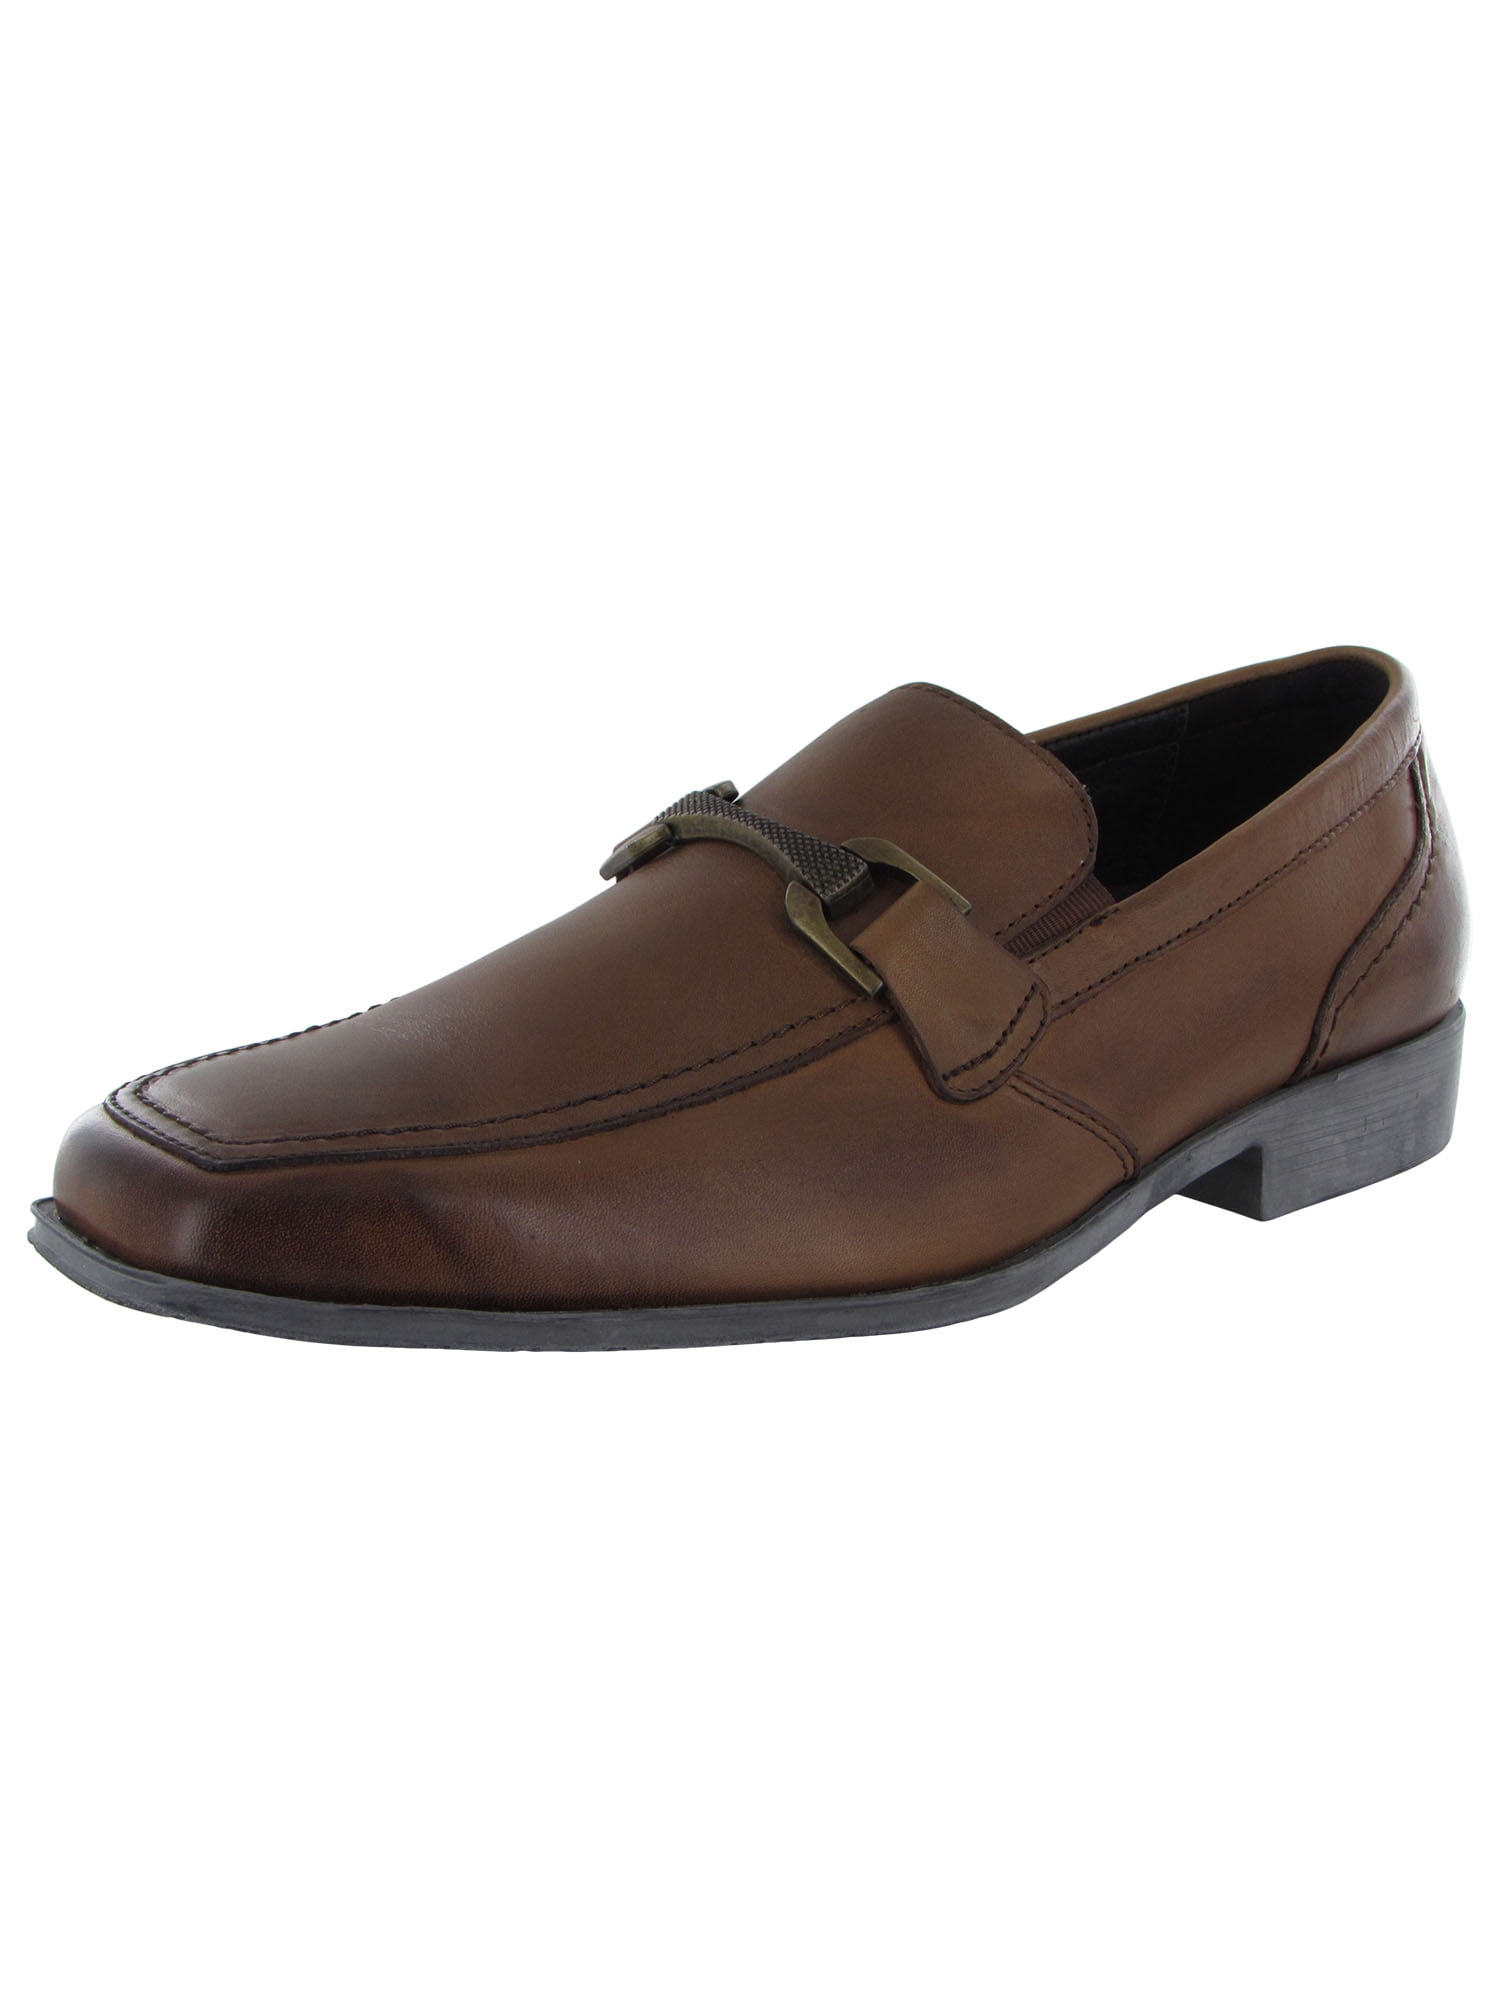 Donald J Pliner Mens Silvanno Leather Perforated Loafers Shoes BHFO 4600 